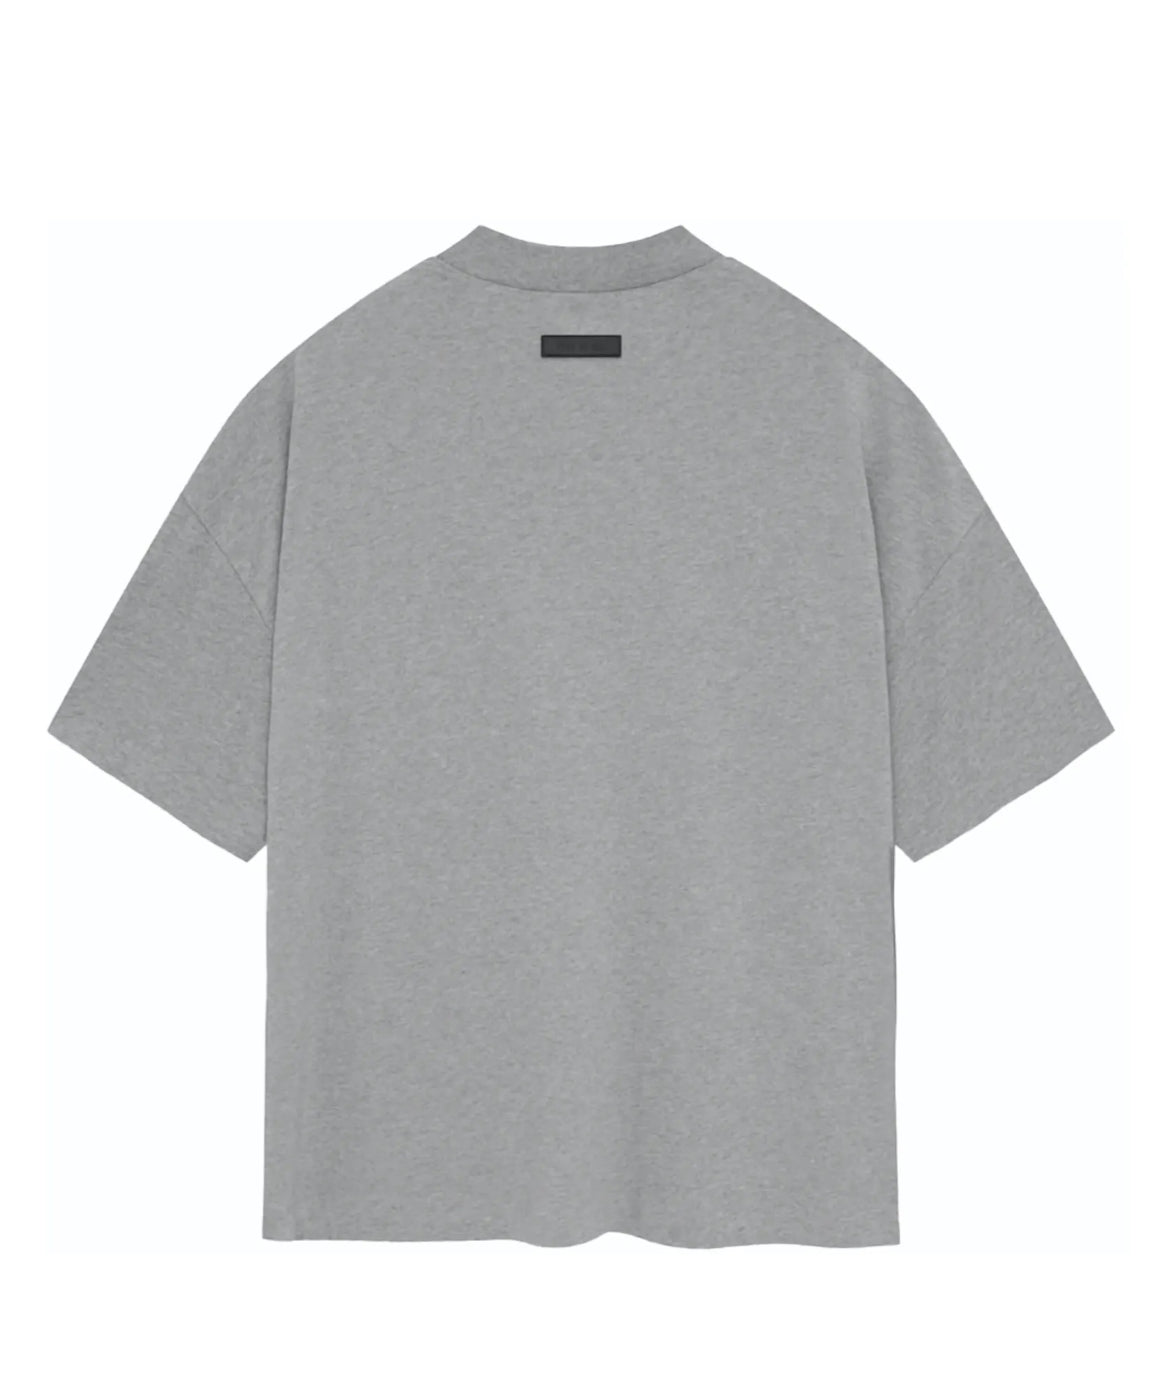 Essentials Fear of God S/S Tee